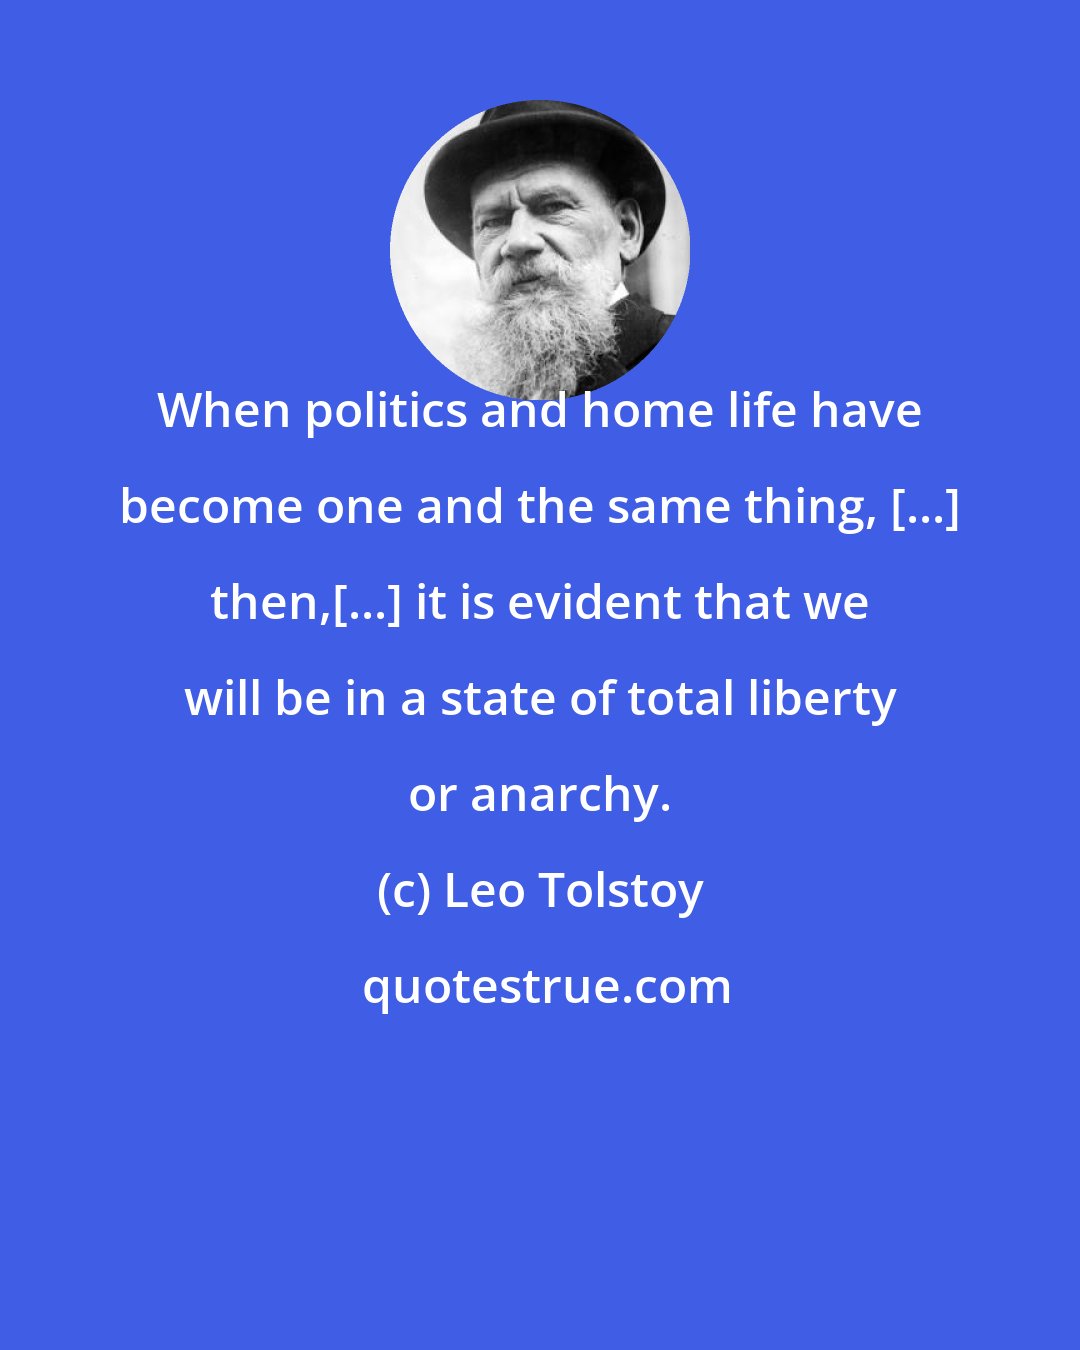 Leo Tolstoy: When politics and home life have become one and the same thing, [...] then,[...] it is evident that we will be in a state of total liberty or anarchy.